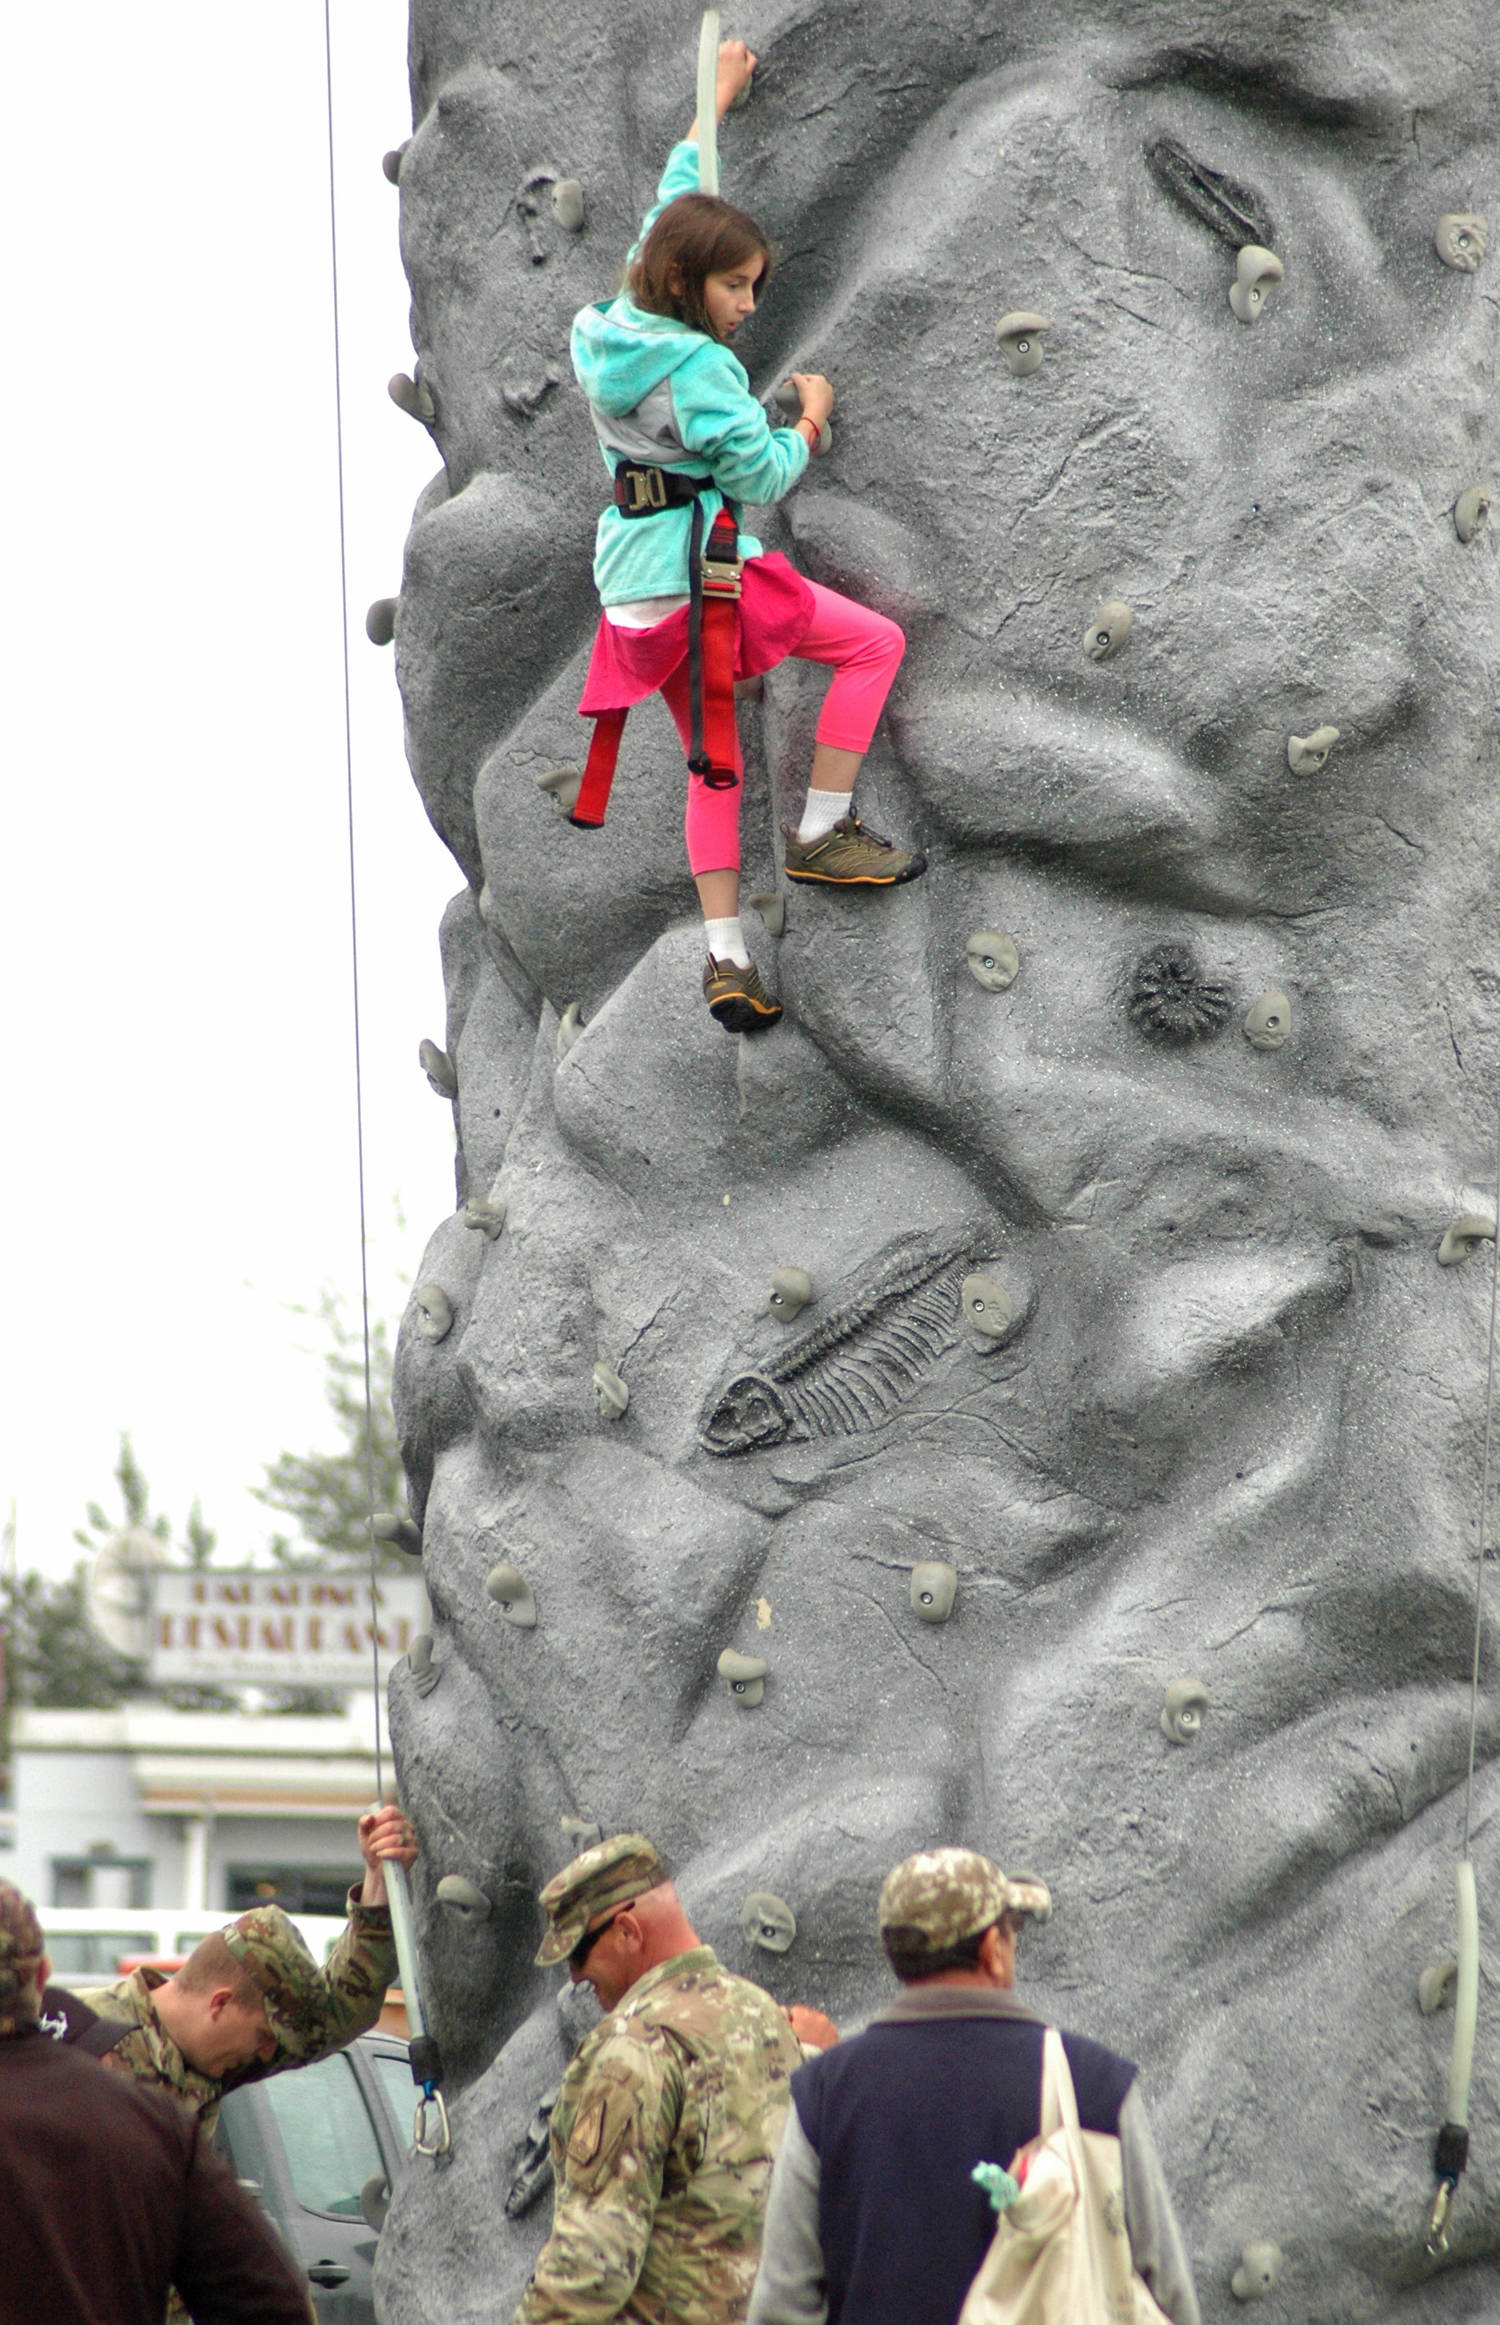 A young climber makes her way up a rock wall monitored by Alaska Army National Guard members at Industry Appreciation Day on Saturday, Aug. 25, 2018 in Kenai, Alaska. (Photo by Elizabeth Earl/Peninsula Clarion)